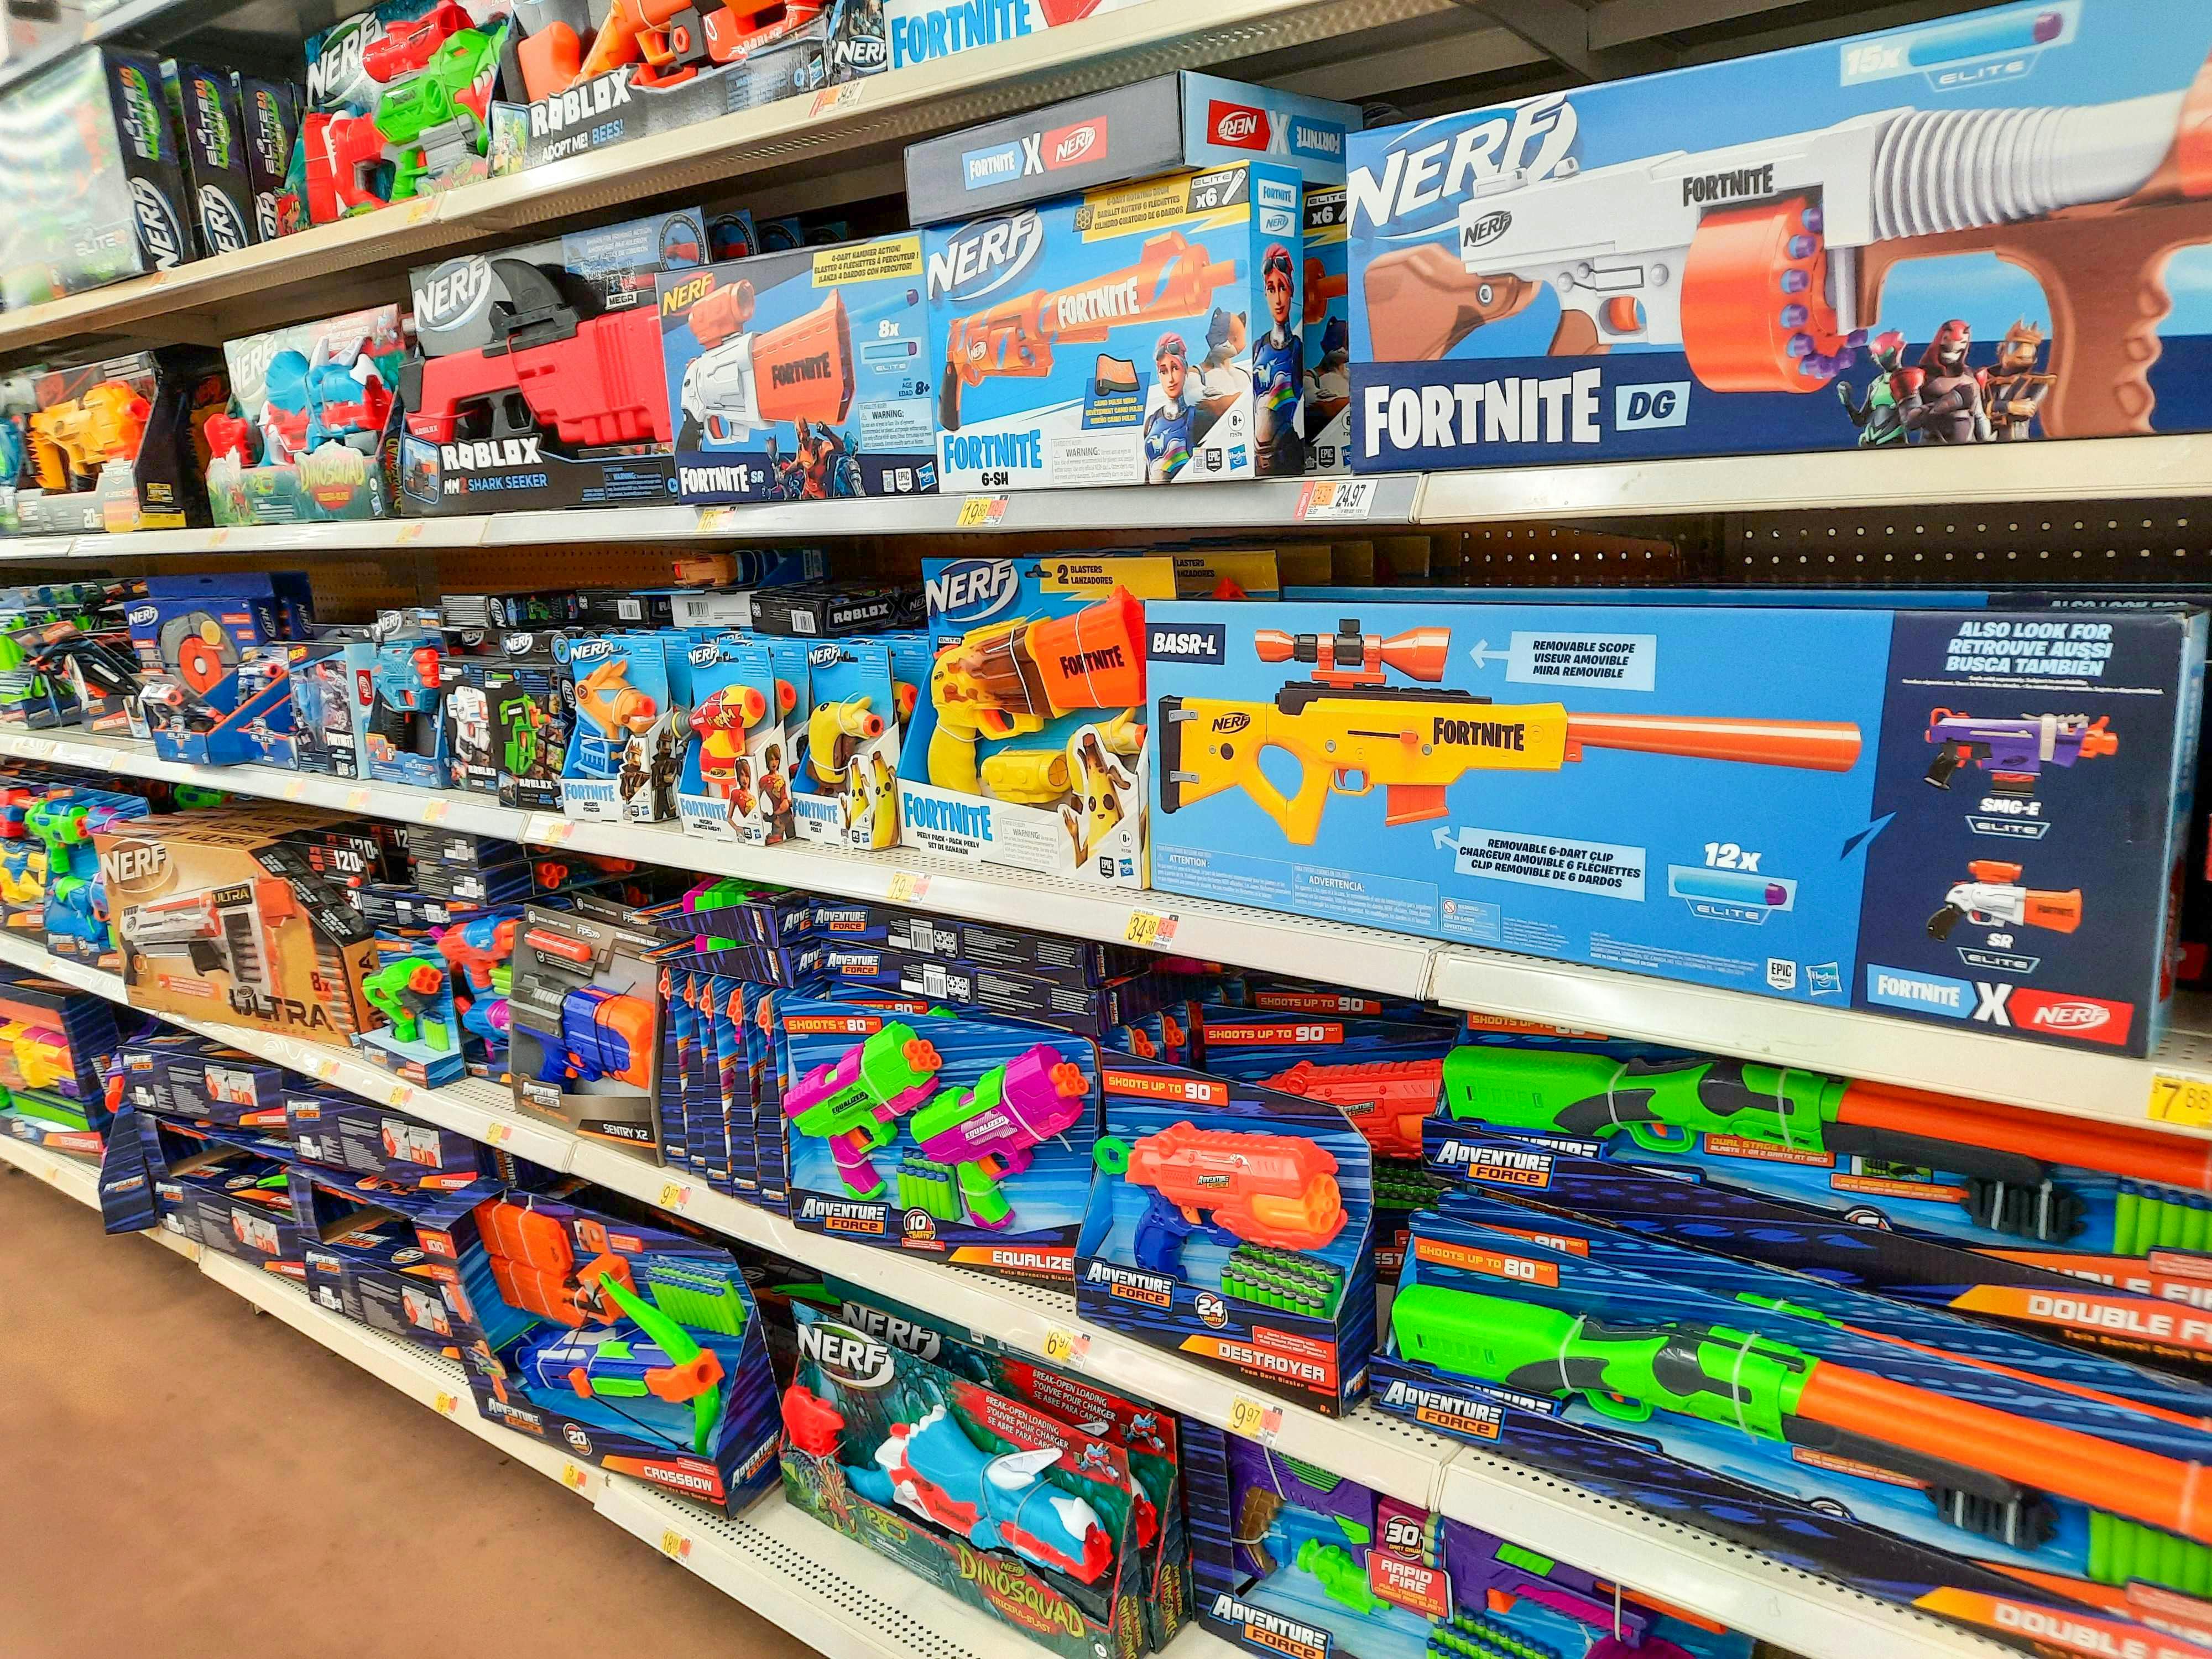 Amazon's Huge Nerf Sale Save Up to 72% - The Coupon Lady